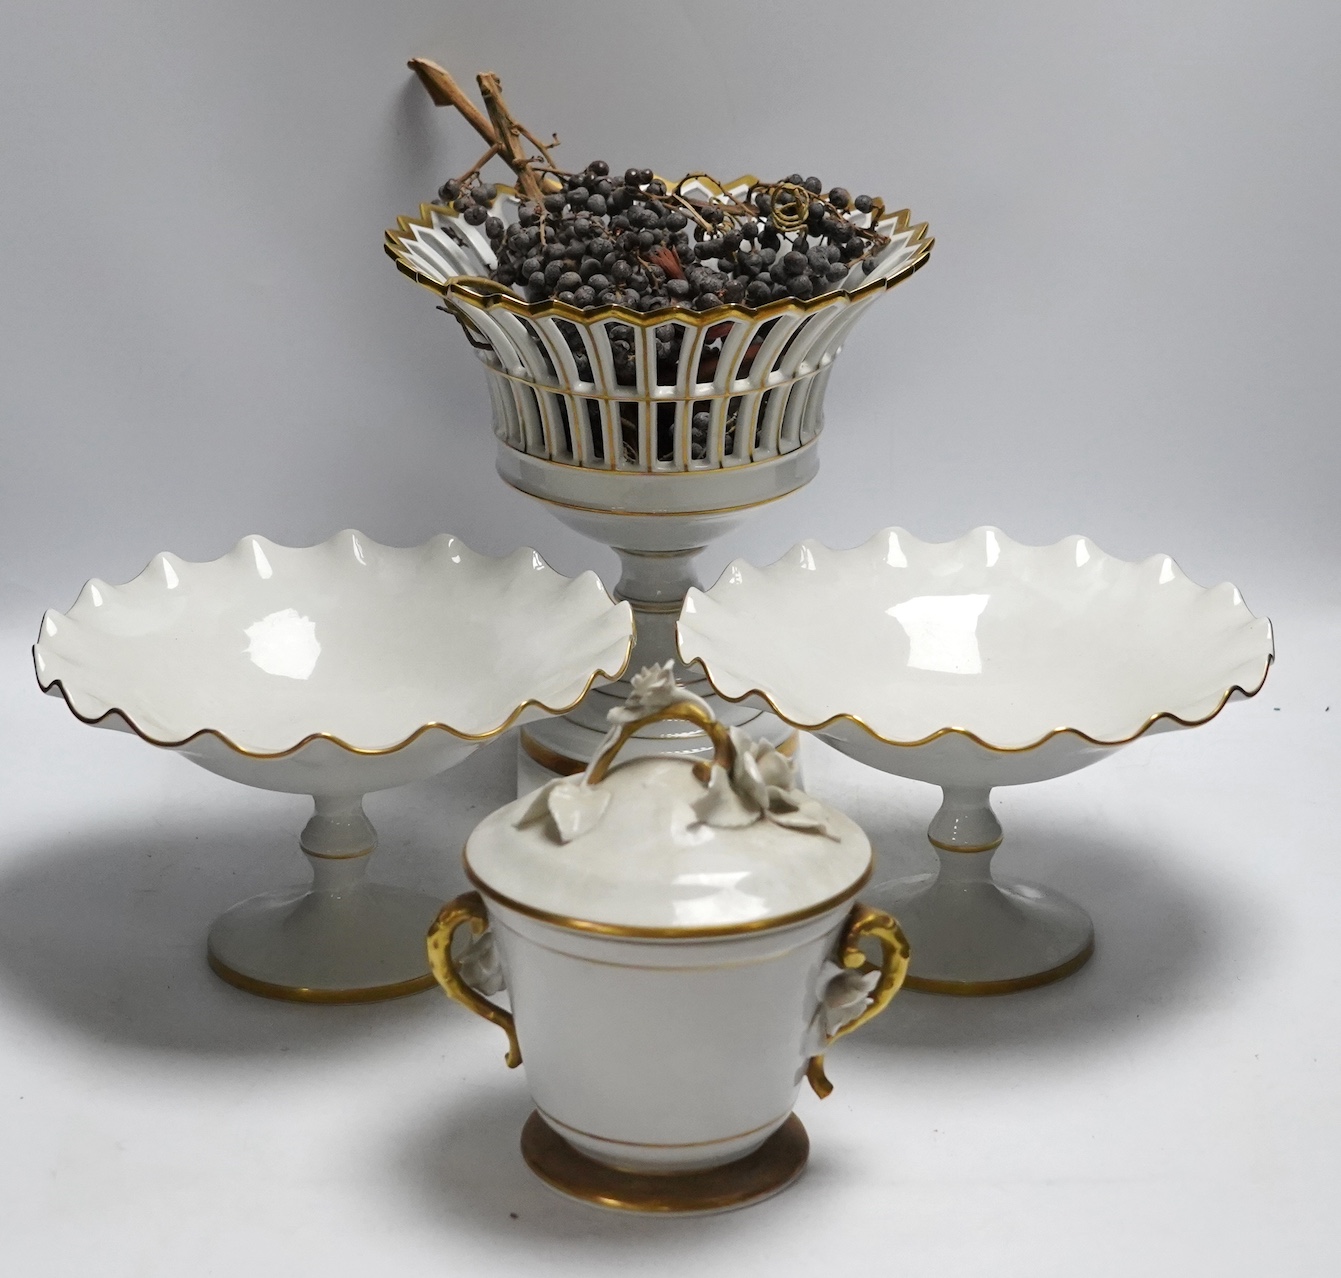 A group of Vista Allegre and other white and gilt porcelain urns, baskets etc, tallest 29.5cm